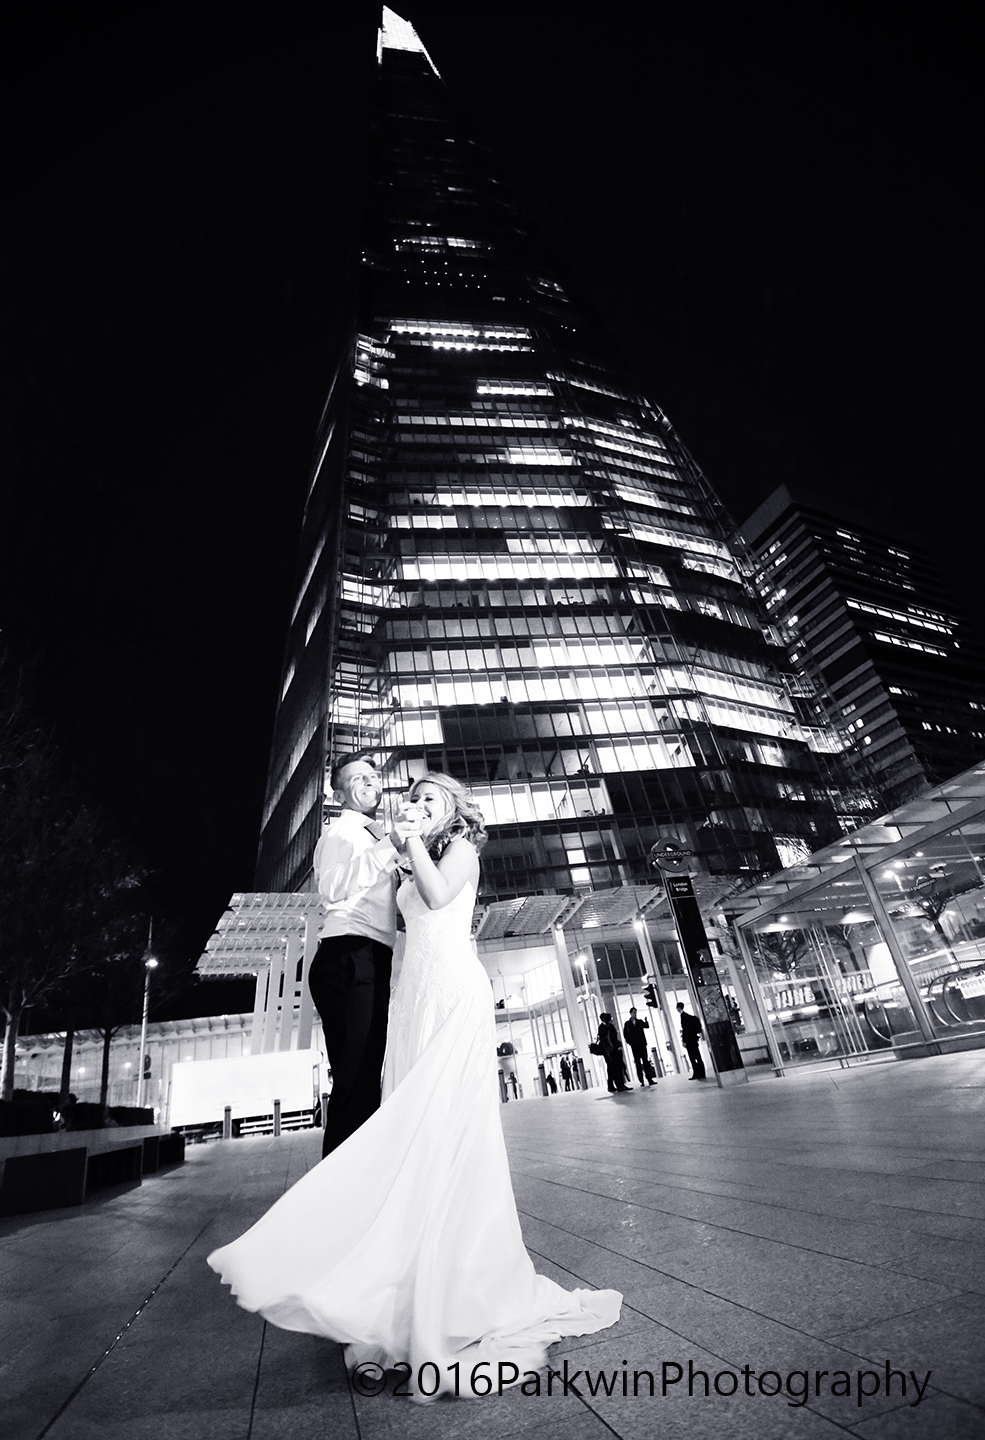 Bride and Groom dancing outside The Shard